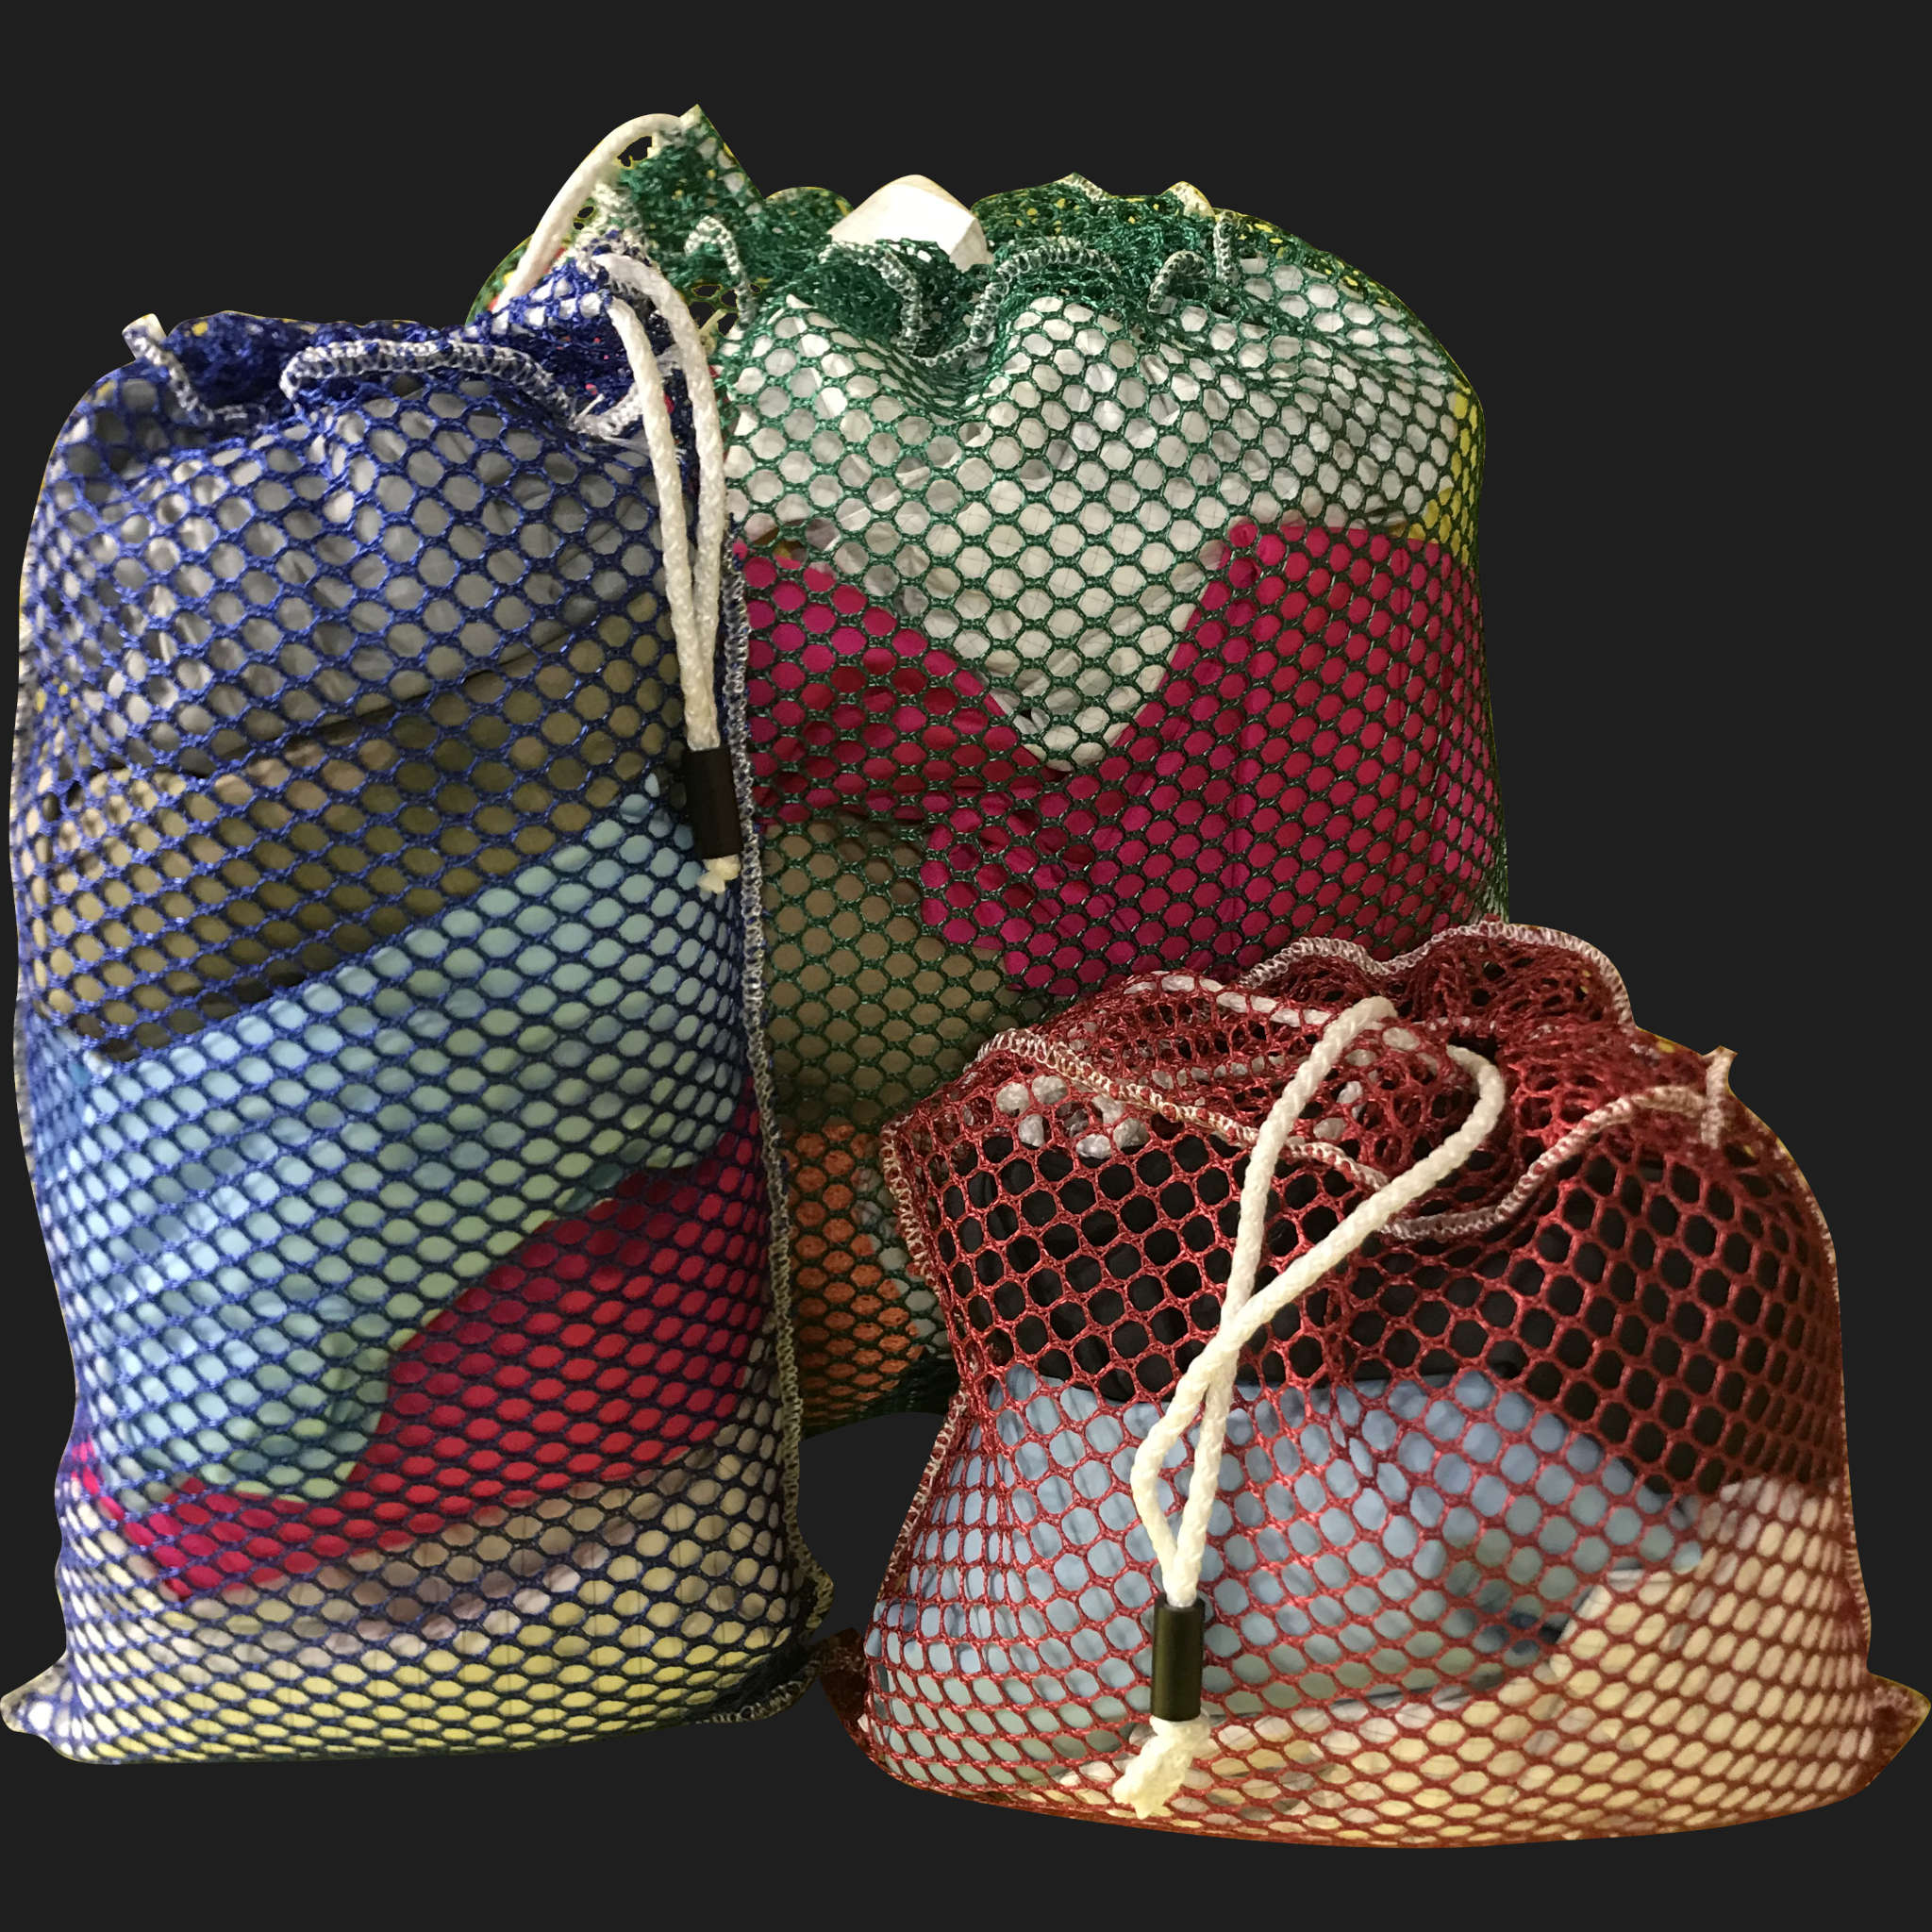 16" x 32" Customized Mesh-Net-Laundry Bags Heavy Duty with Cord and barrellock closure